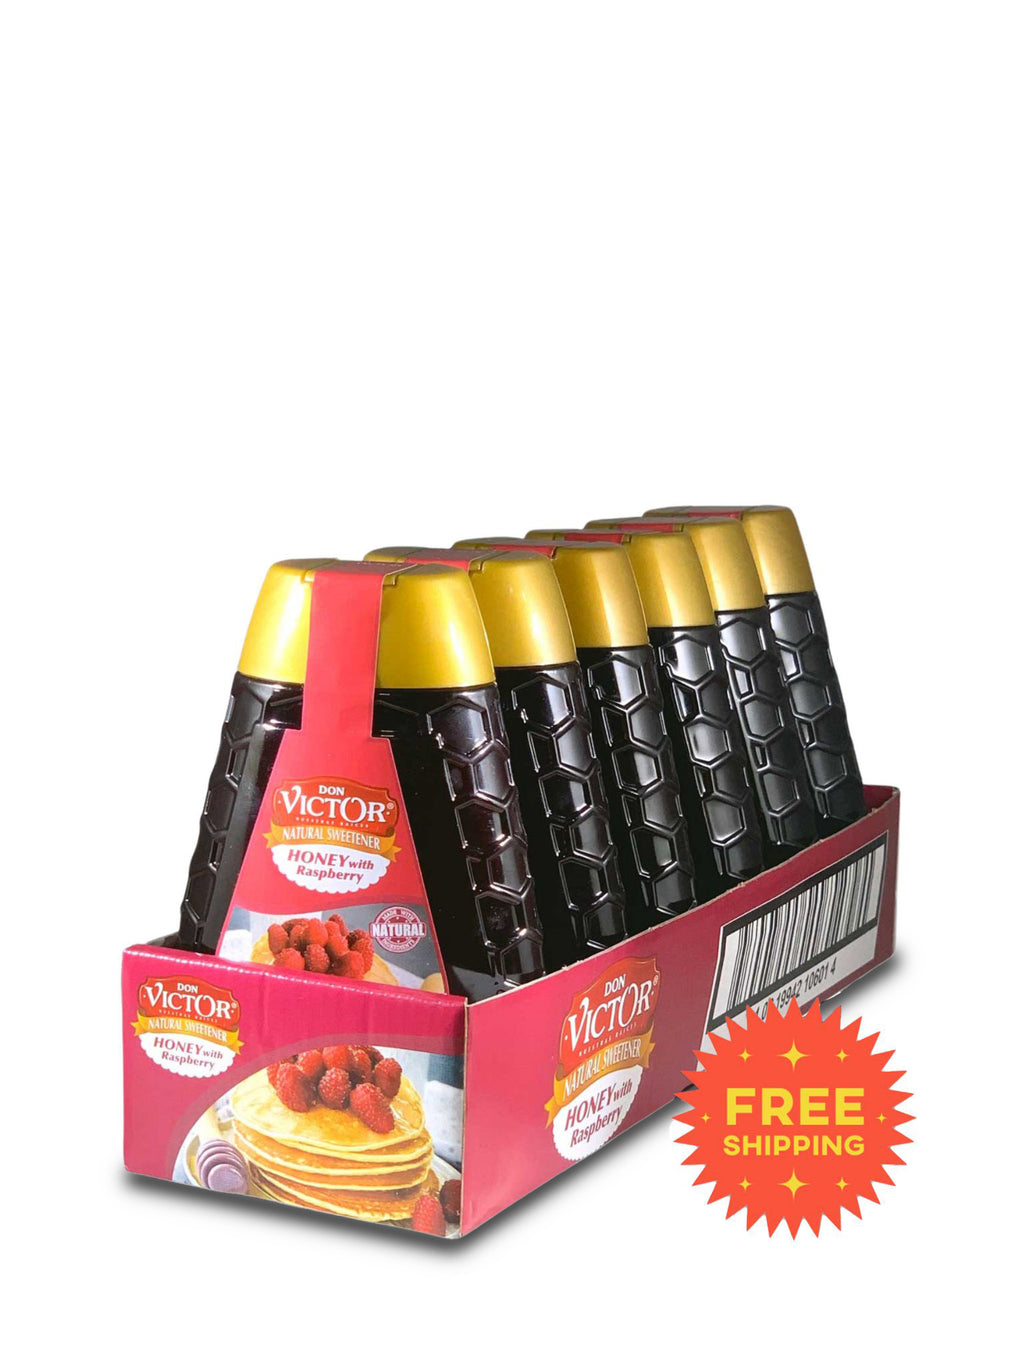 Honey with Raspberry 6-Pack (FREE SHIPPING W/ CODE)